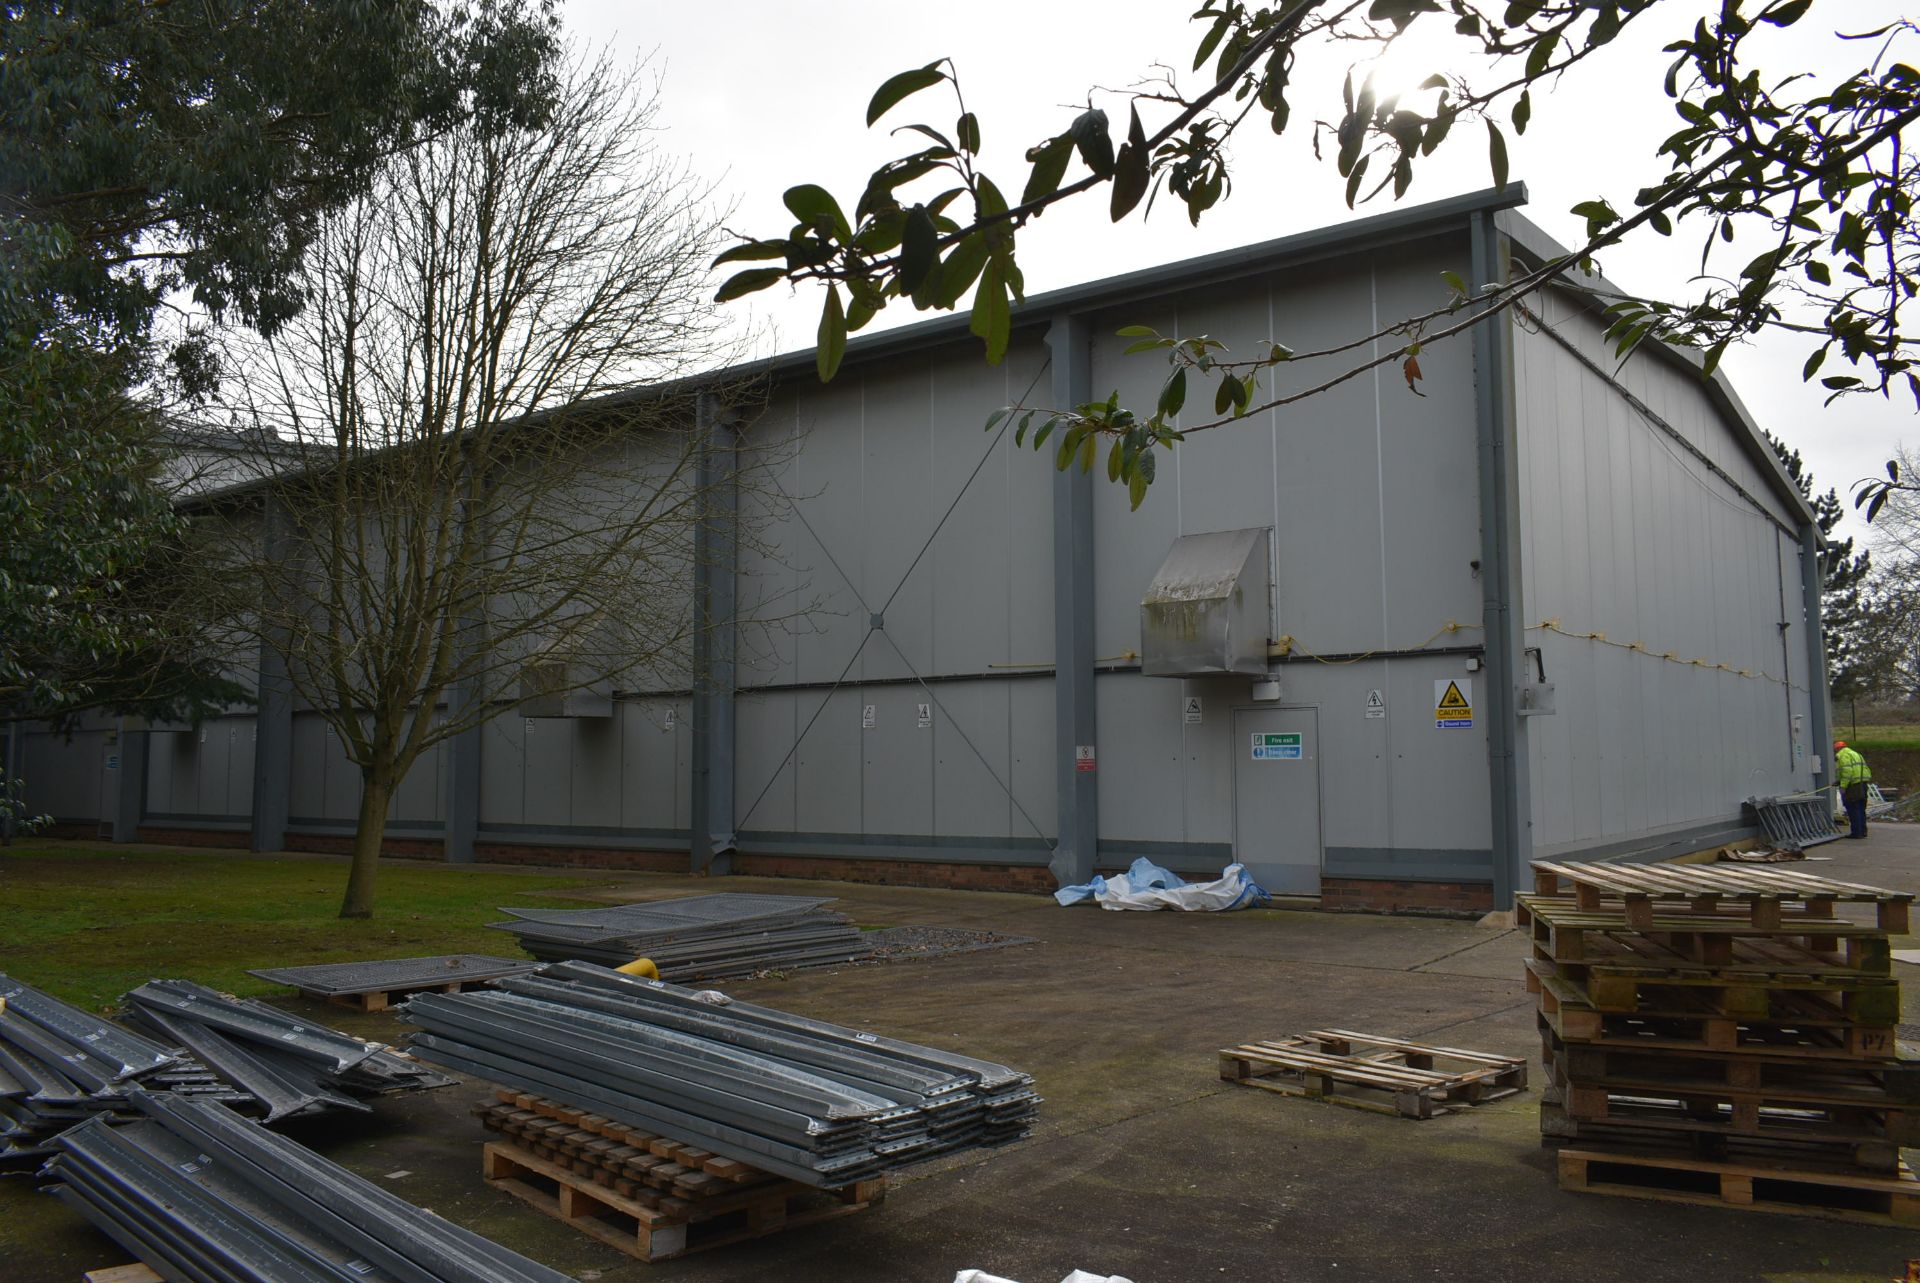 STEEL PORTAL FRAMED WAREHOUSE BUILDING, approx. 70m x 22m x 6.6m eaves height, with insulated